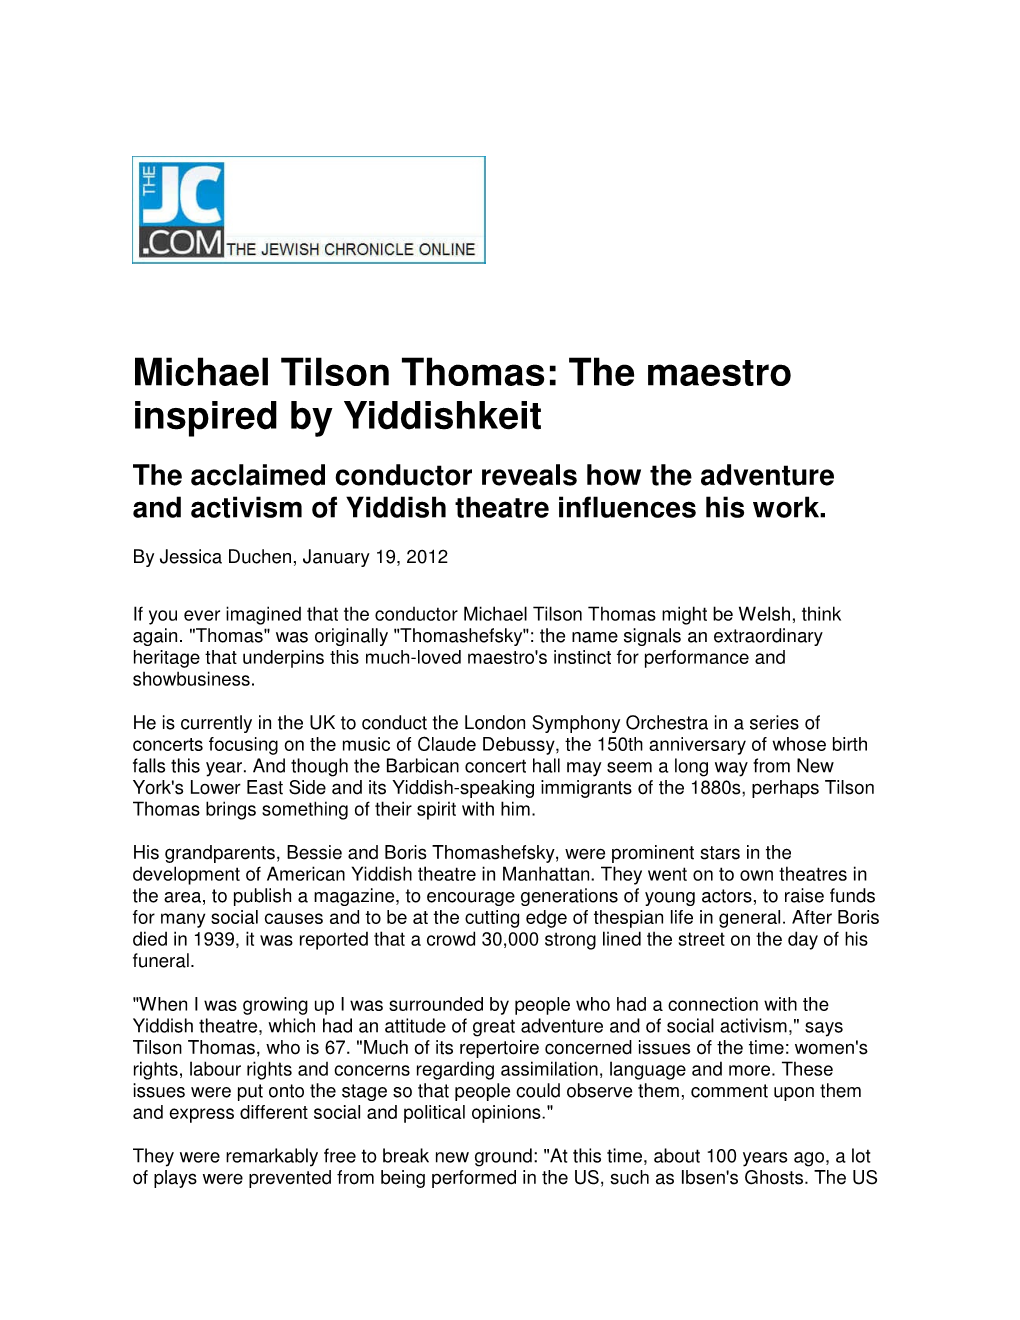 Michael Tilson Thomas: the Maestro Inspired by Yiddishkeit the Acclaimed Conductor Reveals How the Adventure and Activism of Yiddish Theatre Influences His Work